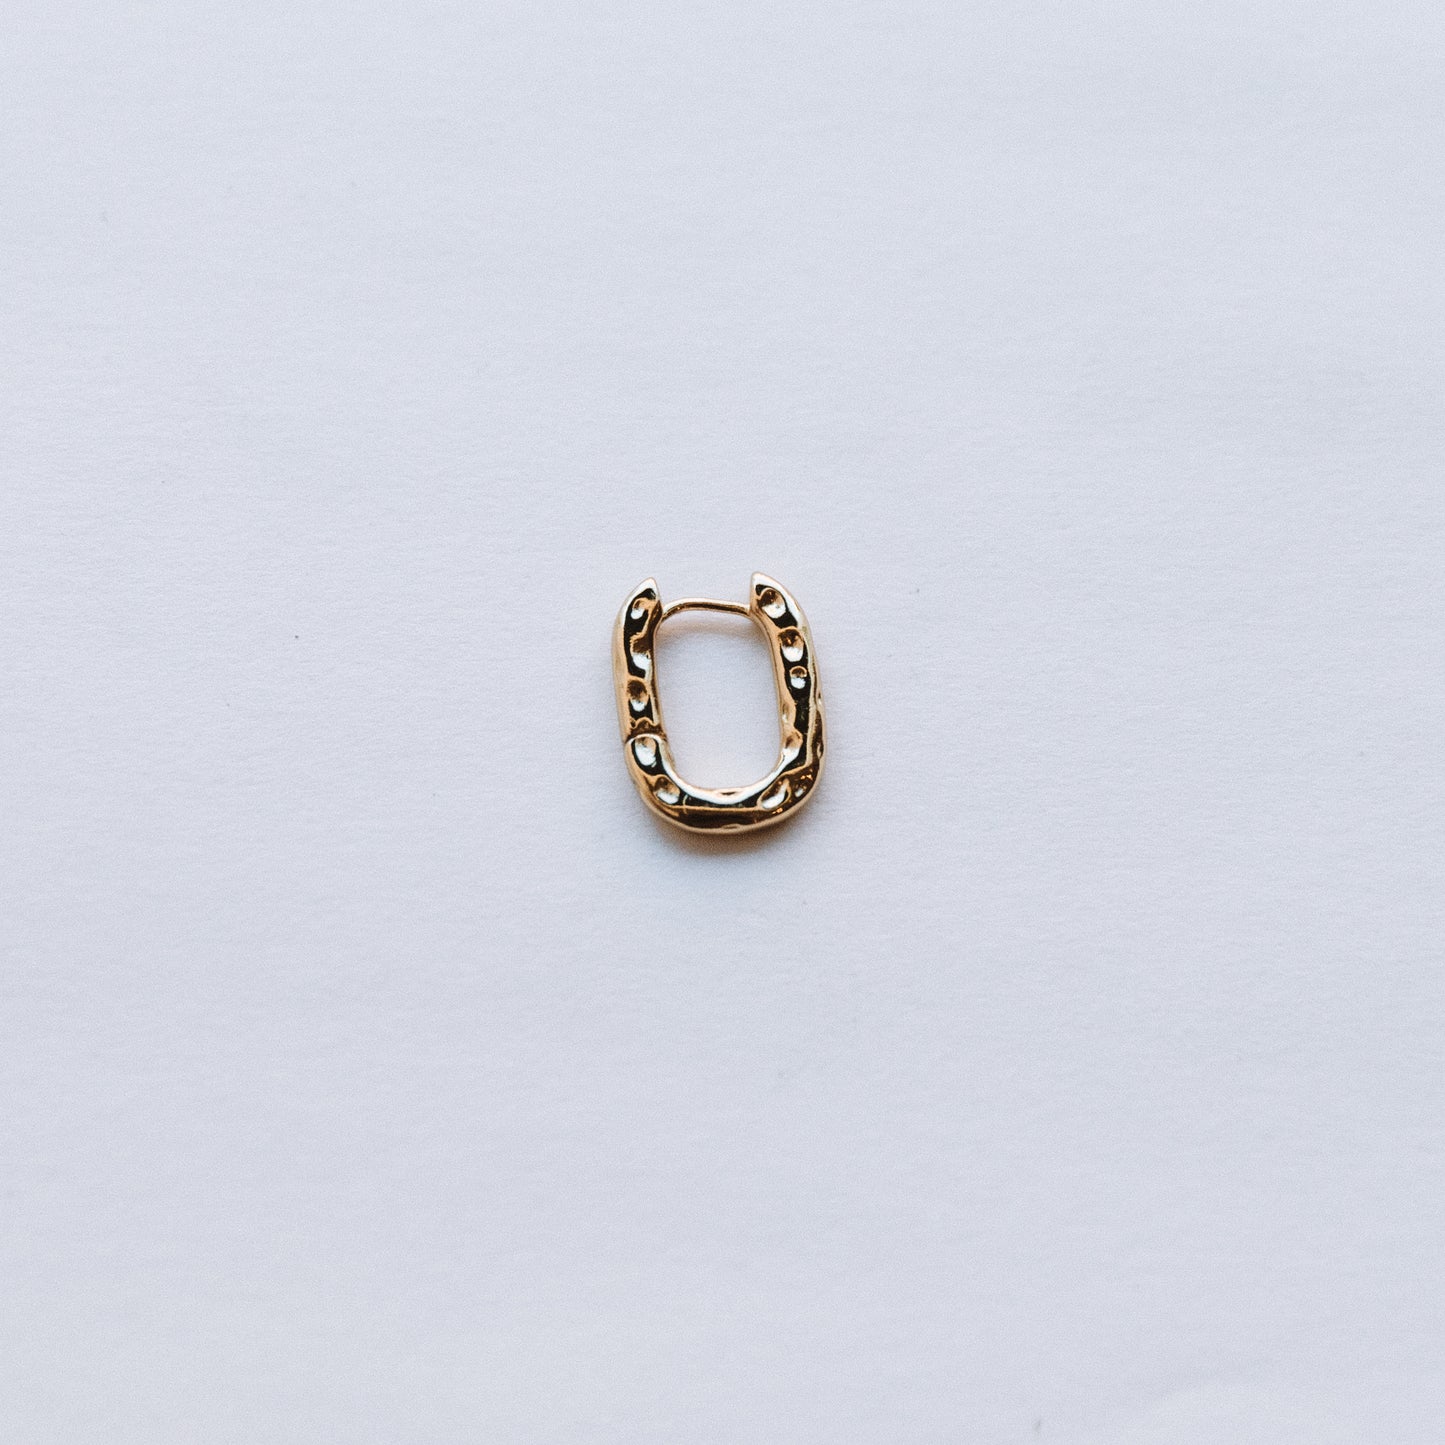 The Hammered Rectangle Hoop